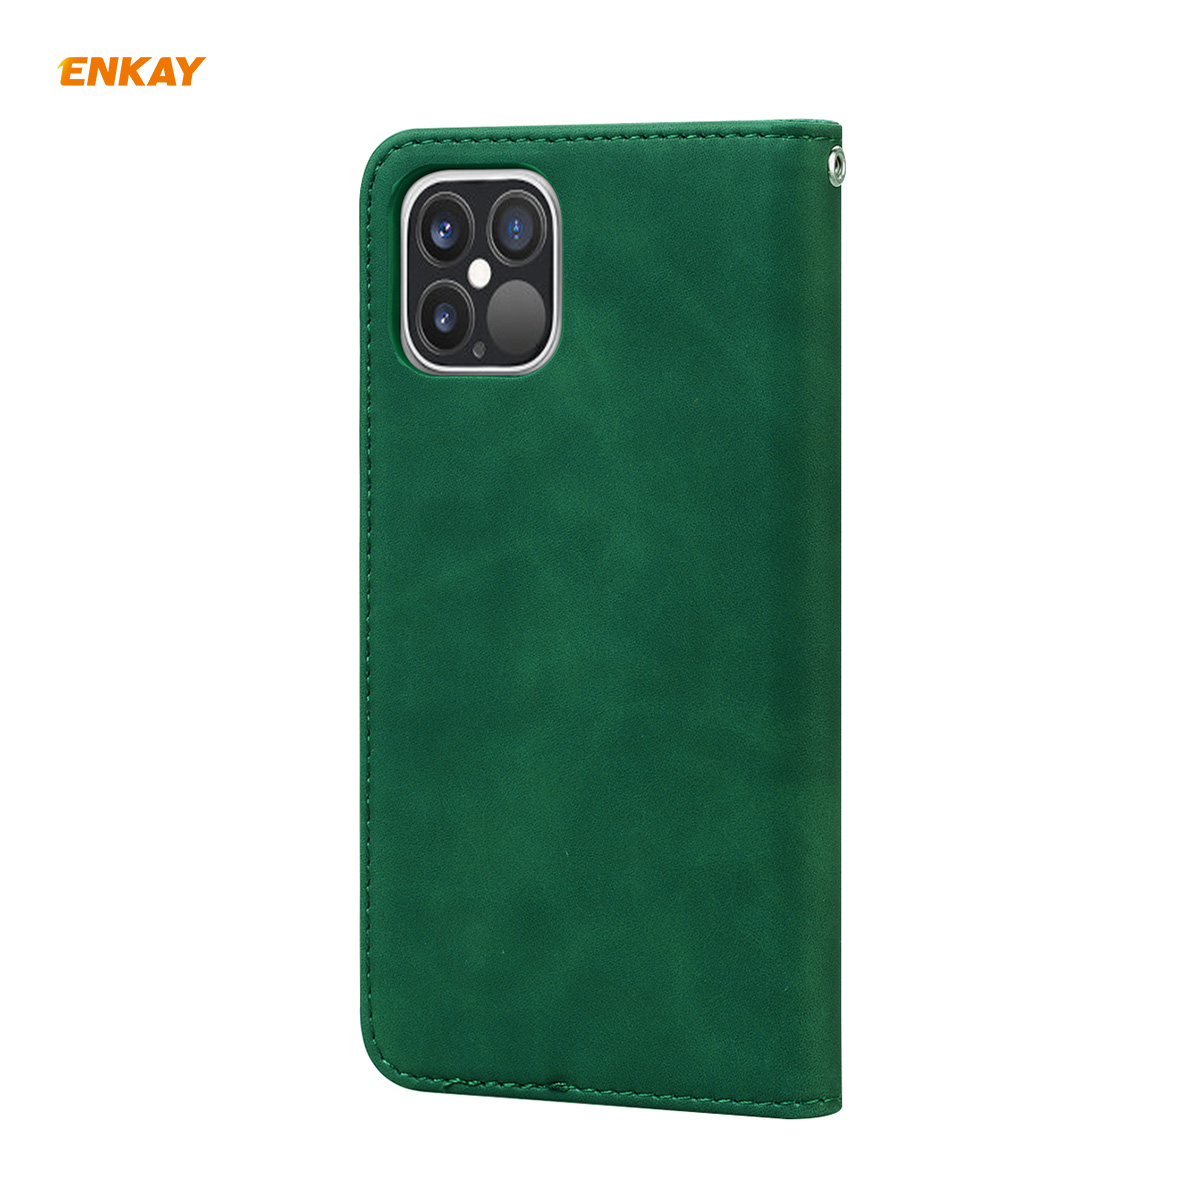 Enkay-for-iPhone-12-Pro-Max-Case-Business-Magnetic-Flip-with-Card-Slot-Stand-PU-Leather--TPU-Full-Co-1755830-9